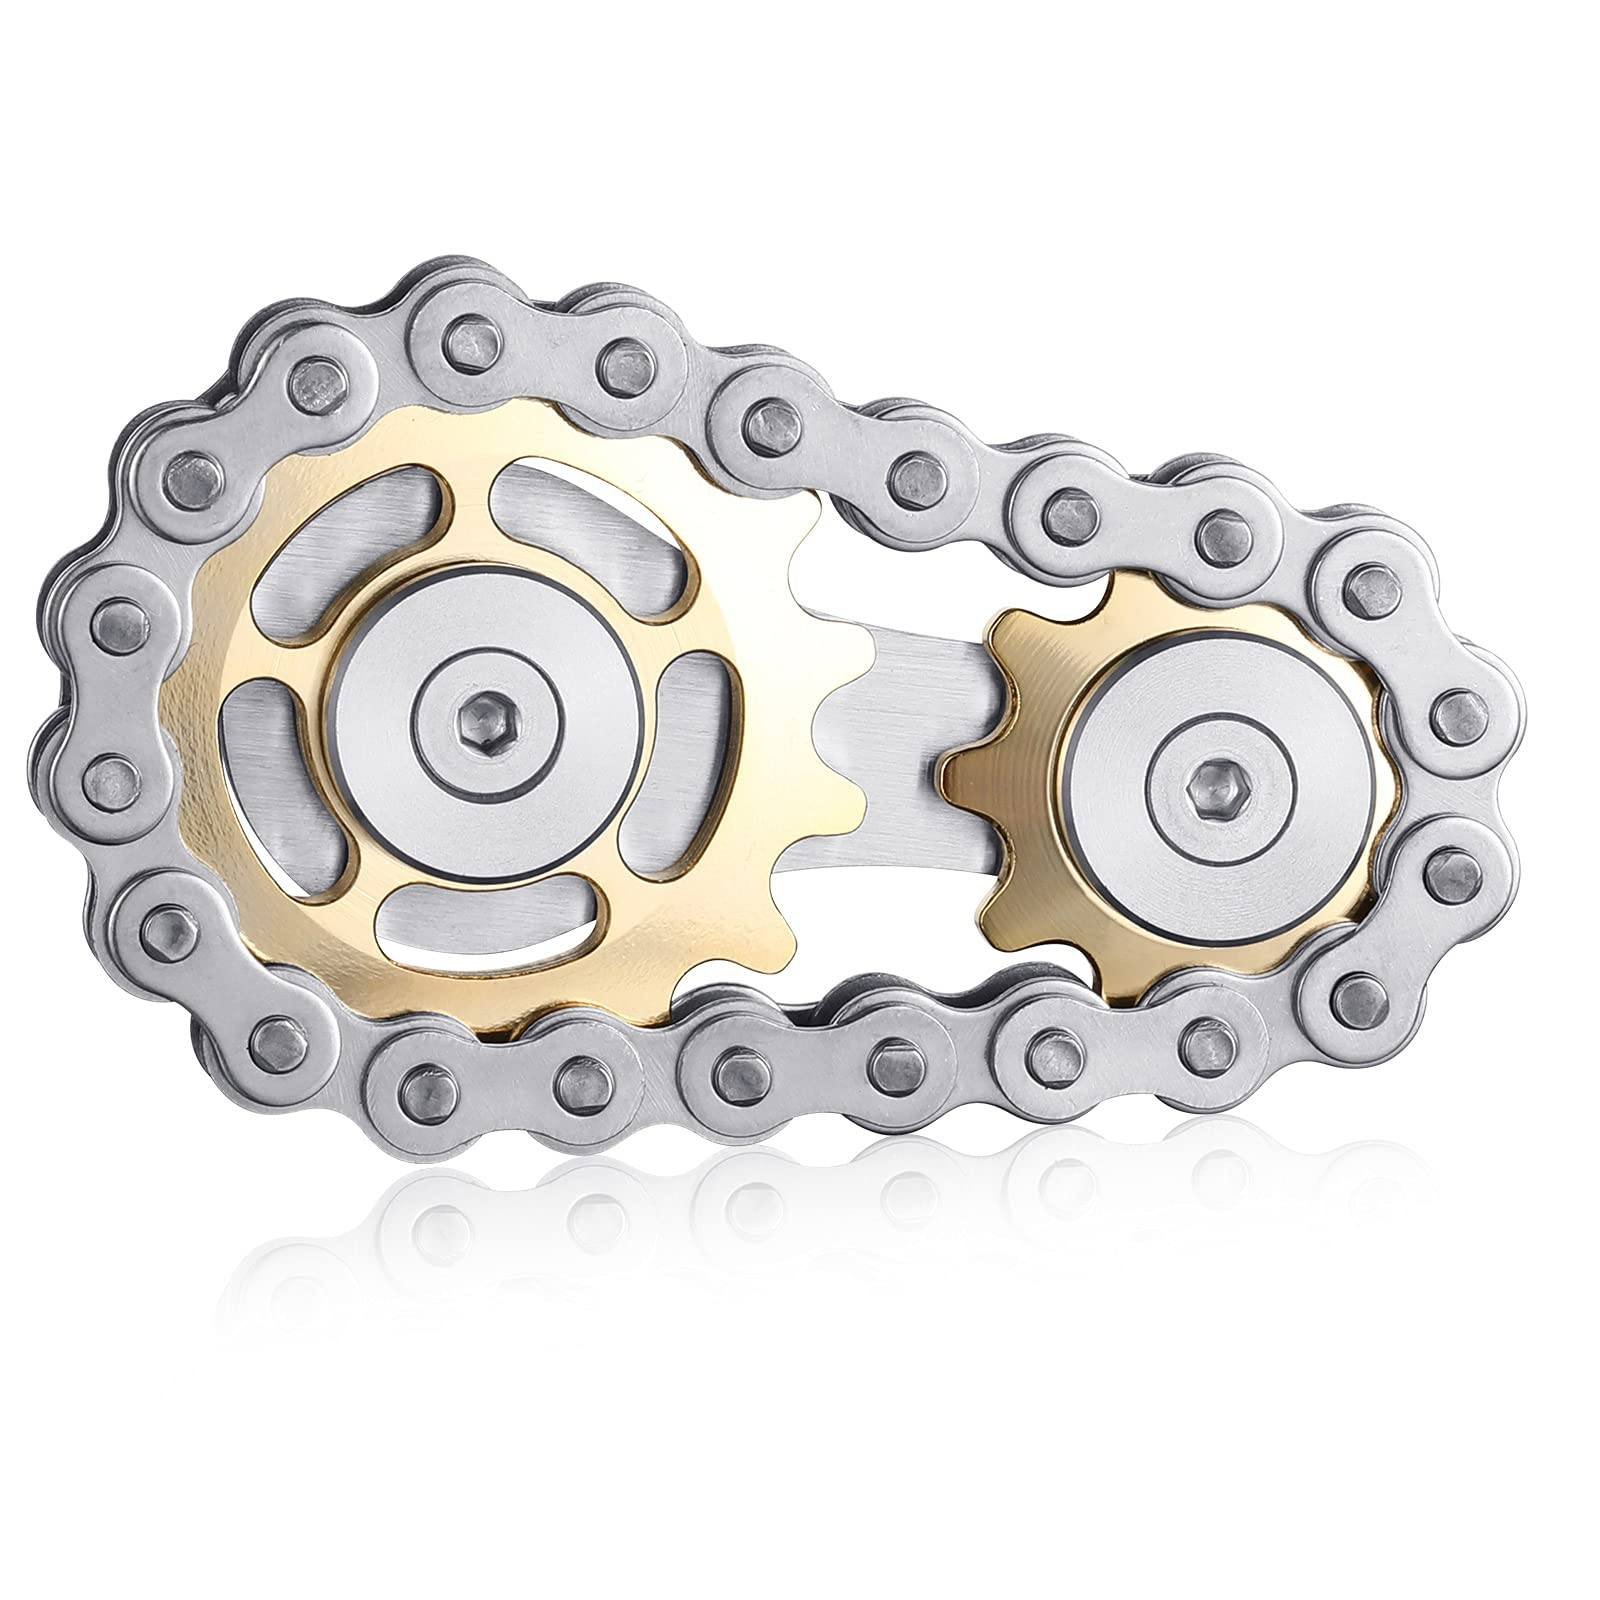 🔥(Last Day Sale- 50% OFF) Sprockets Bicycle Chain Fidget Spinner Toys